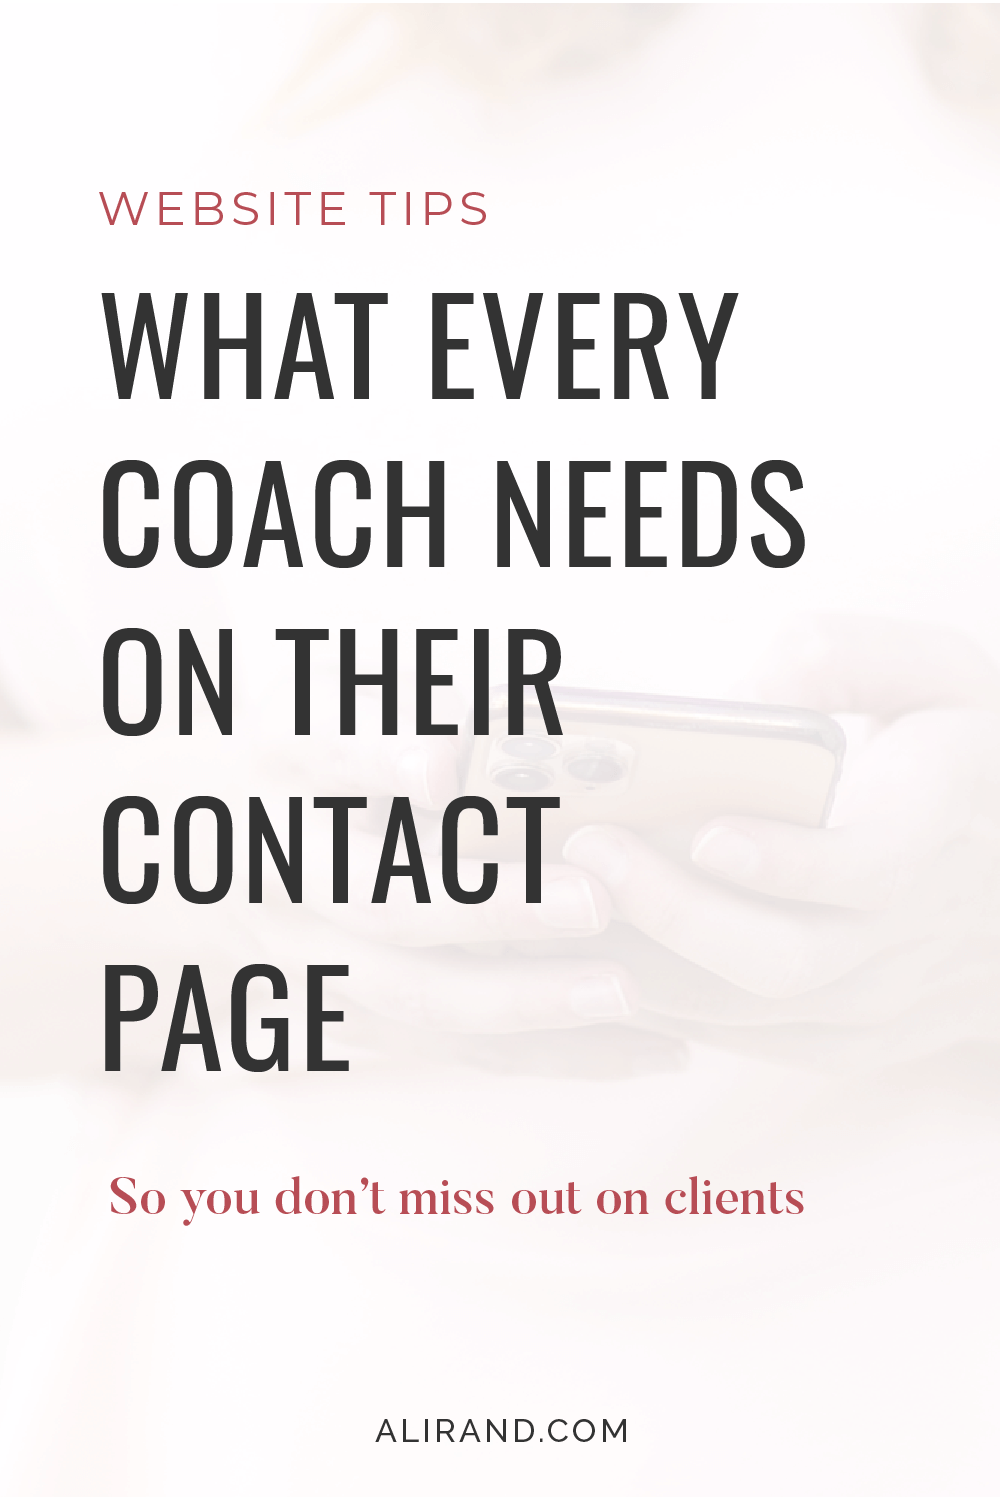 What Every Coach Needs on their Contact Page